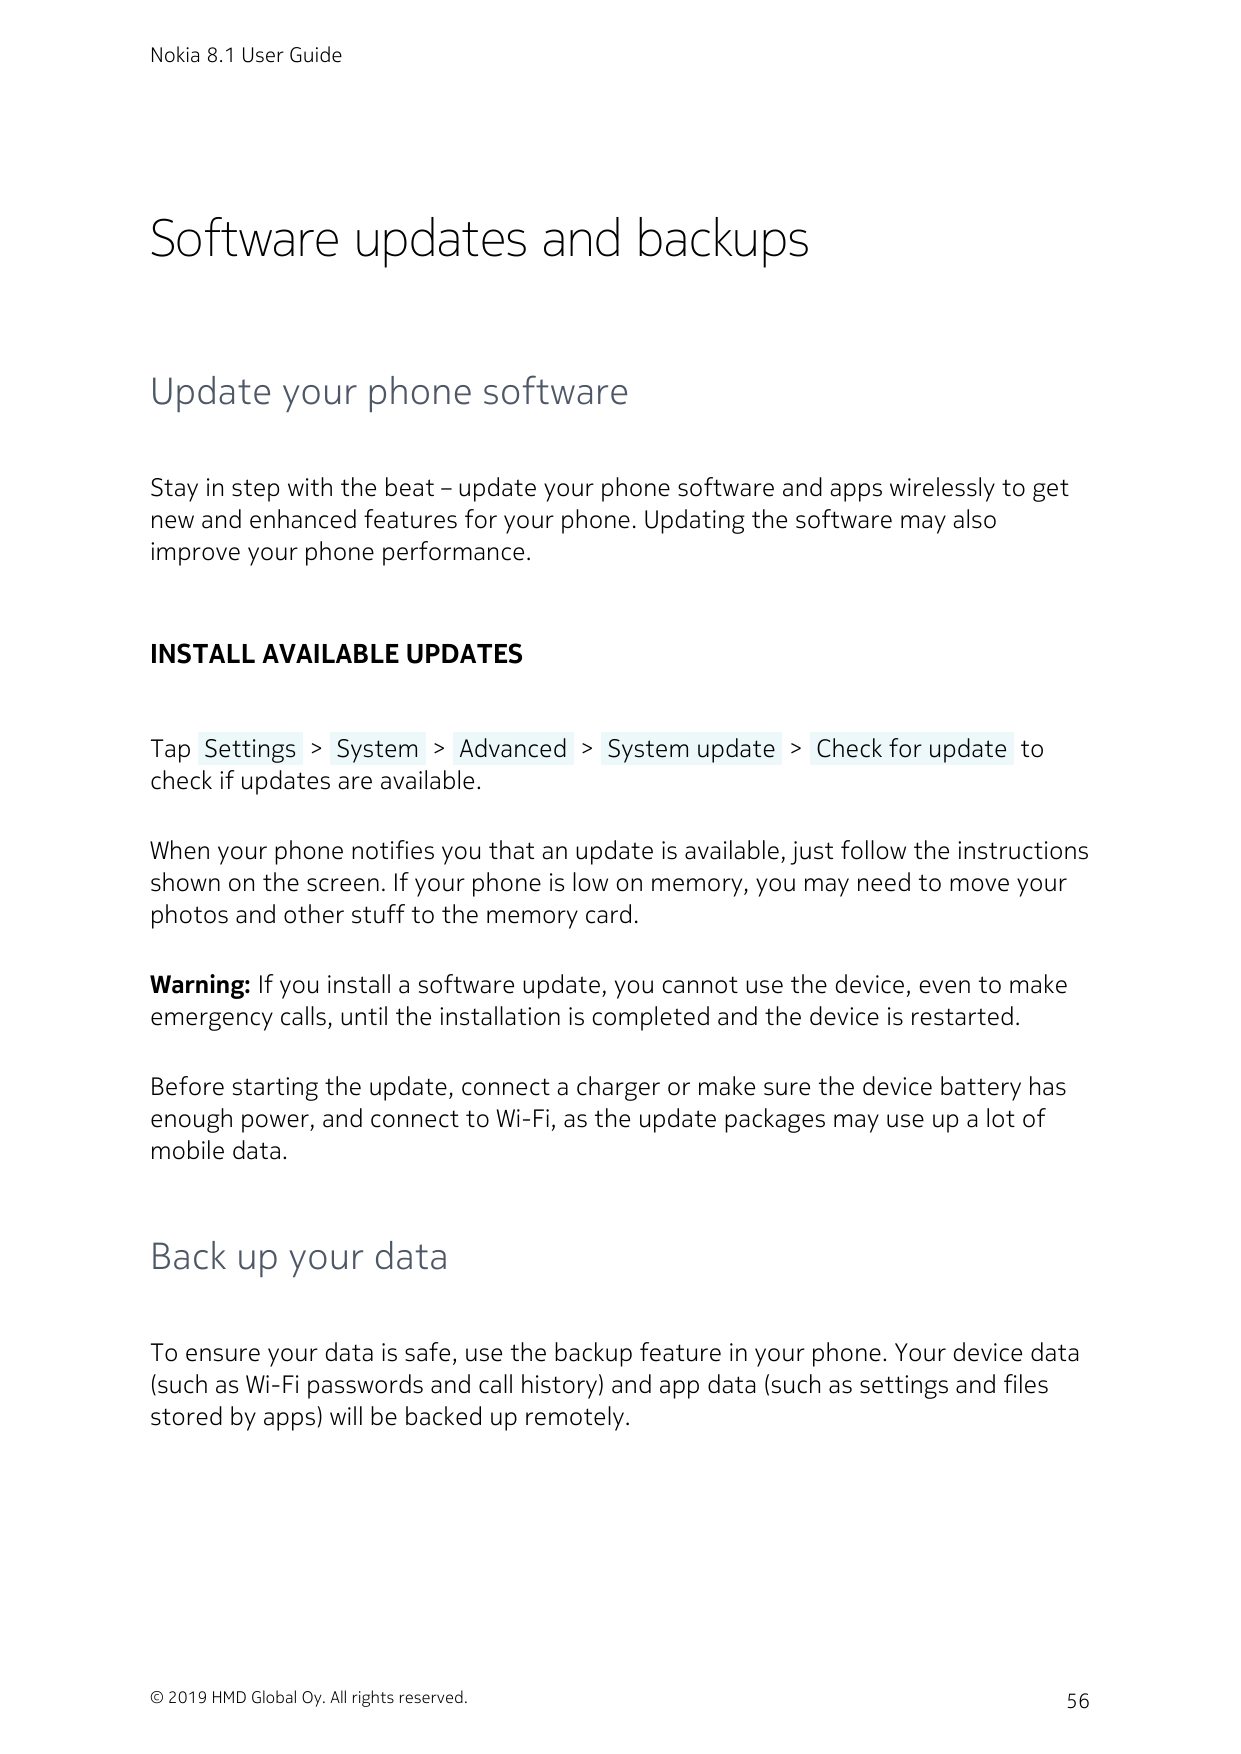 Nokia 8.1 User GuideSoftware updates and backupsUpdate your phone softwareStay in step with the beat – update your phone softwar